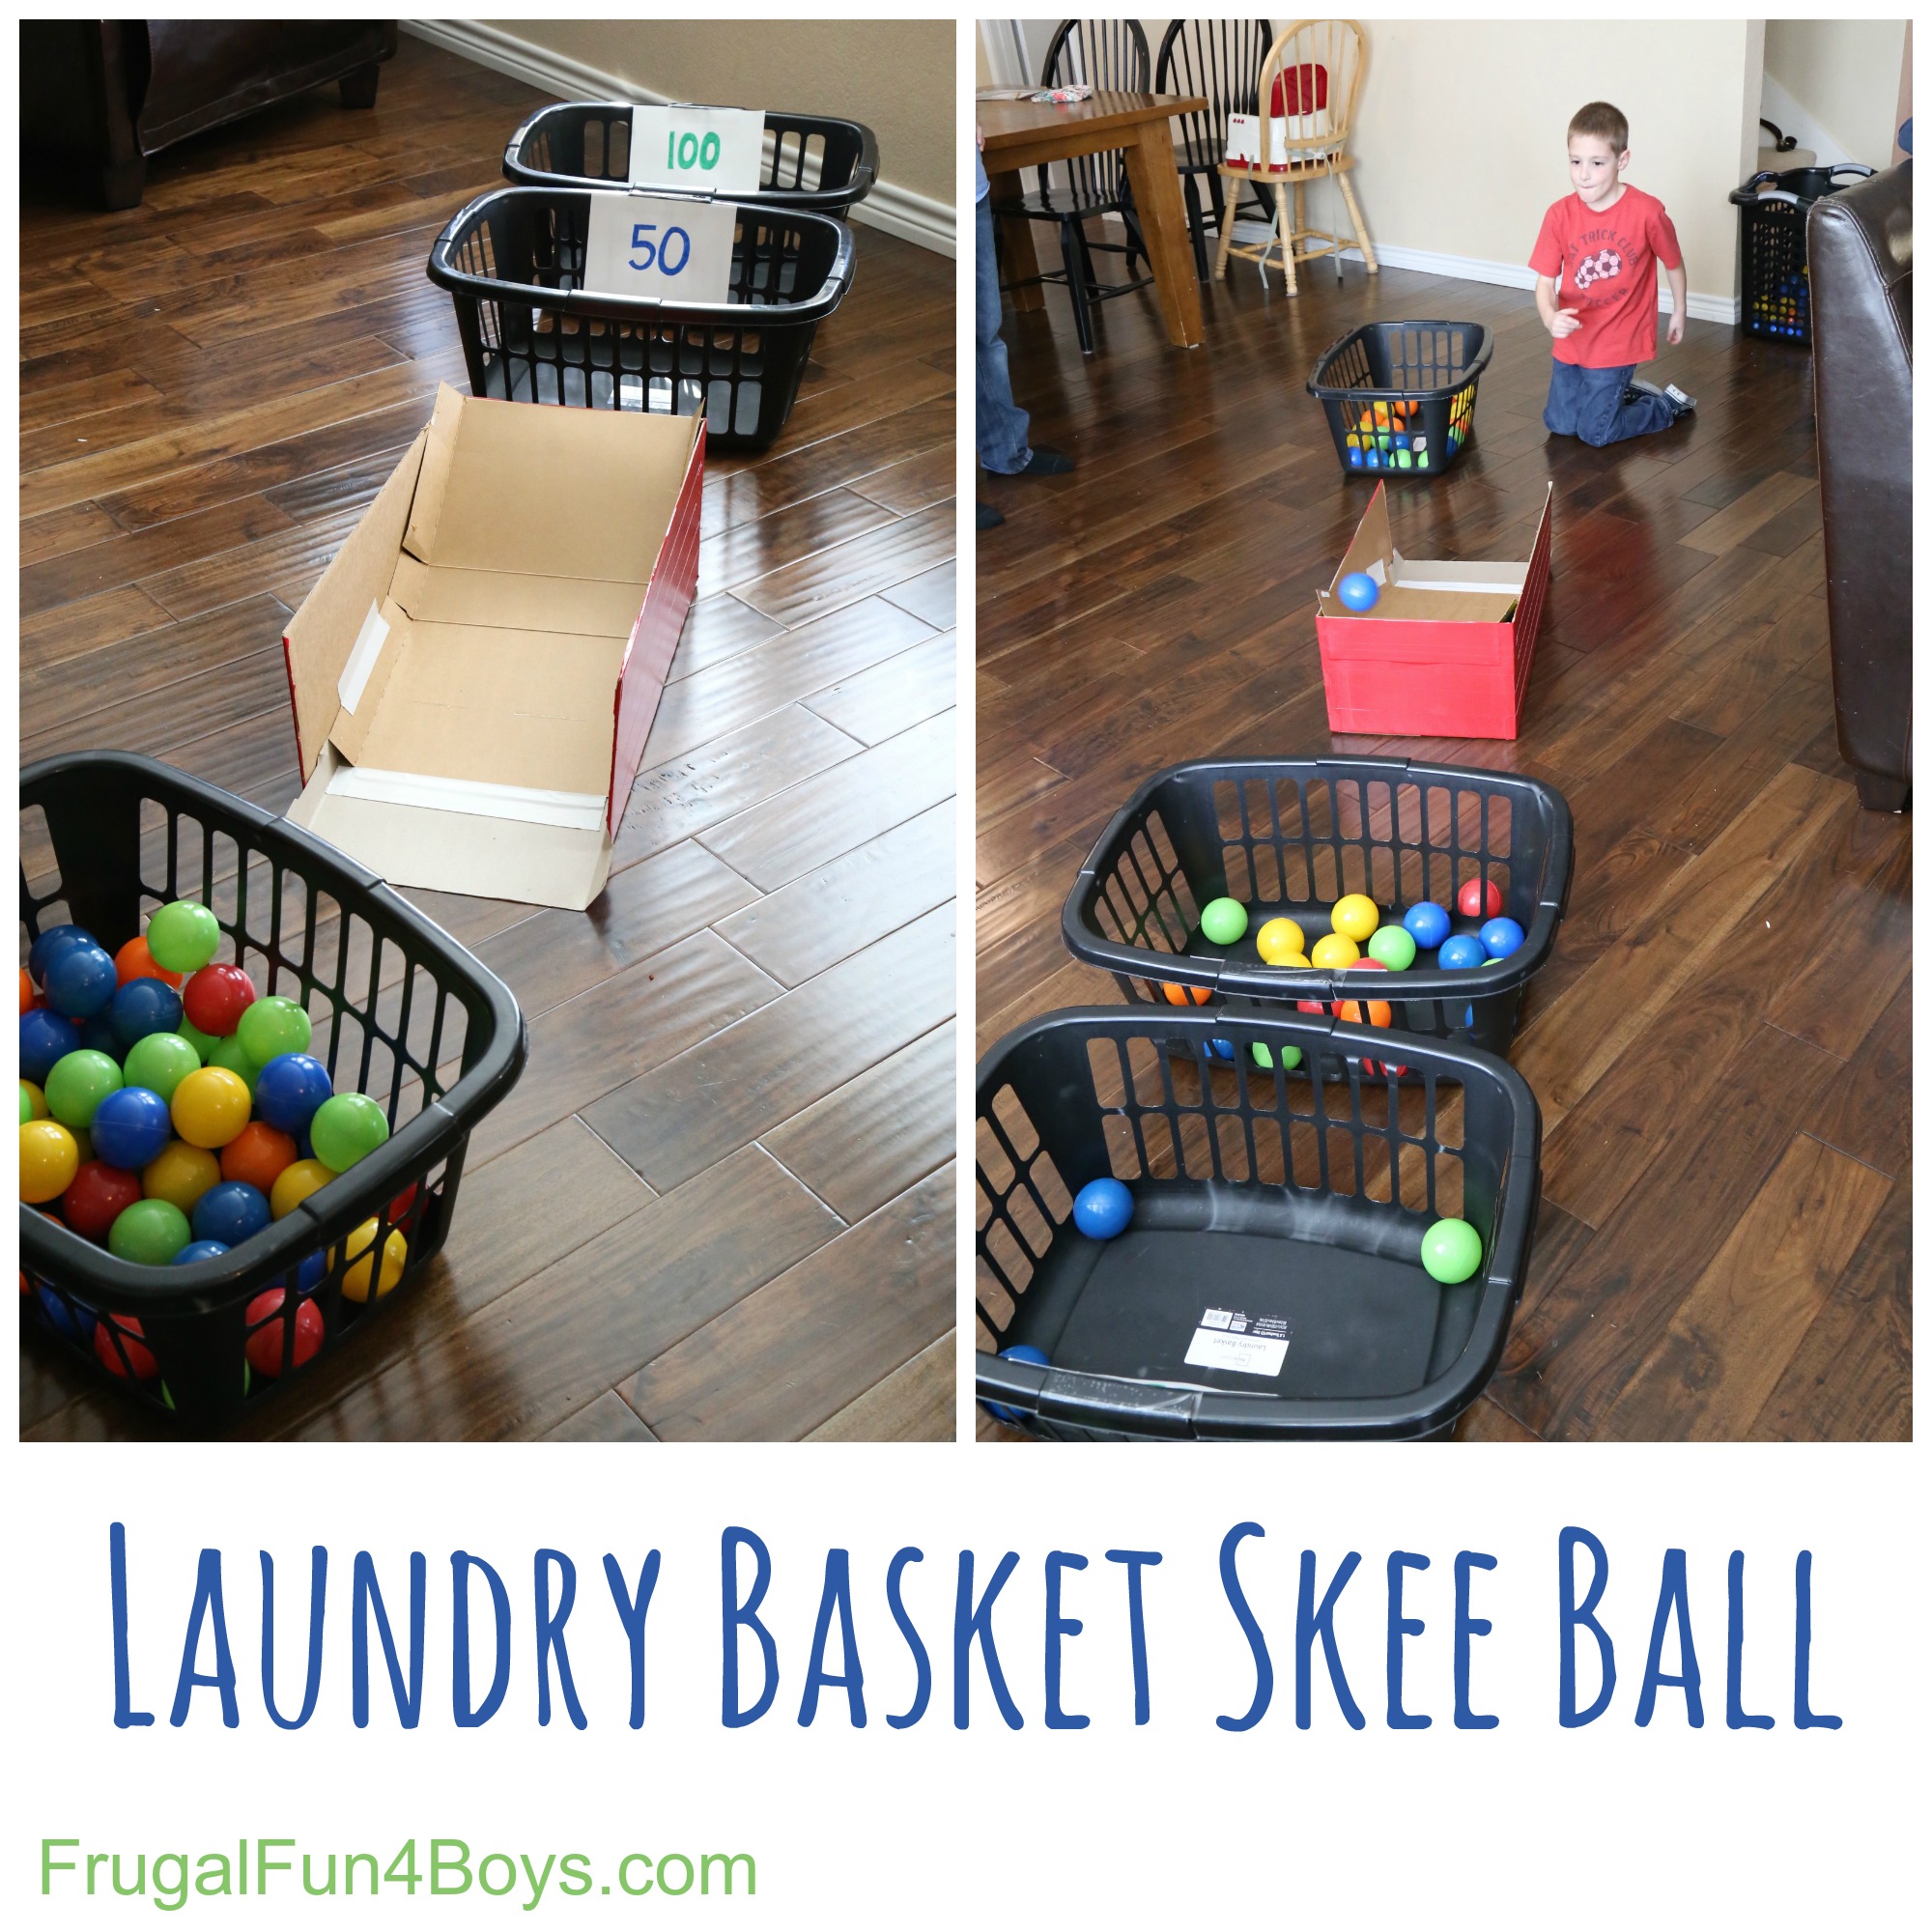 Laundry Basket Skee Ball - An indoor active game!